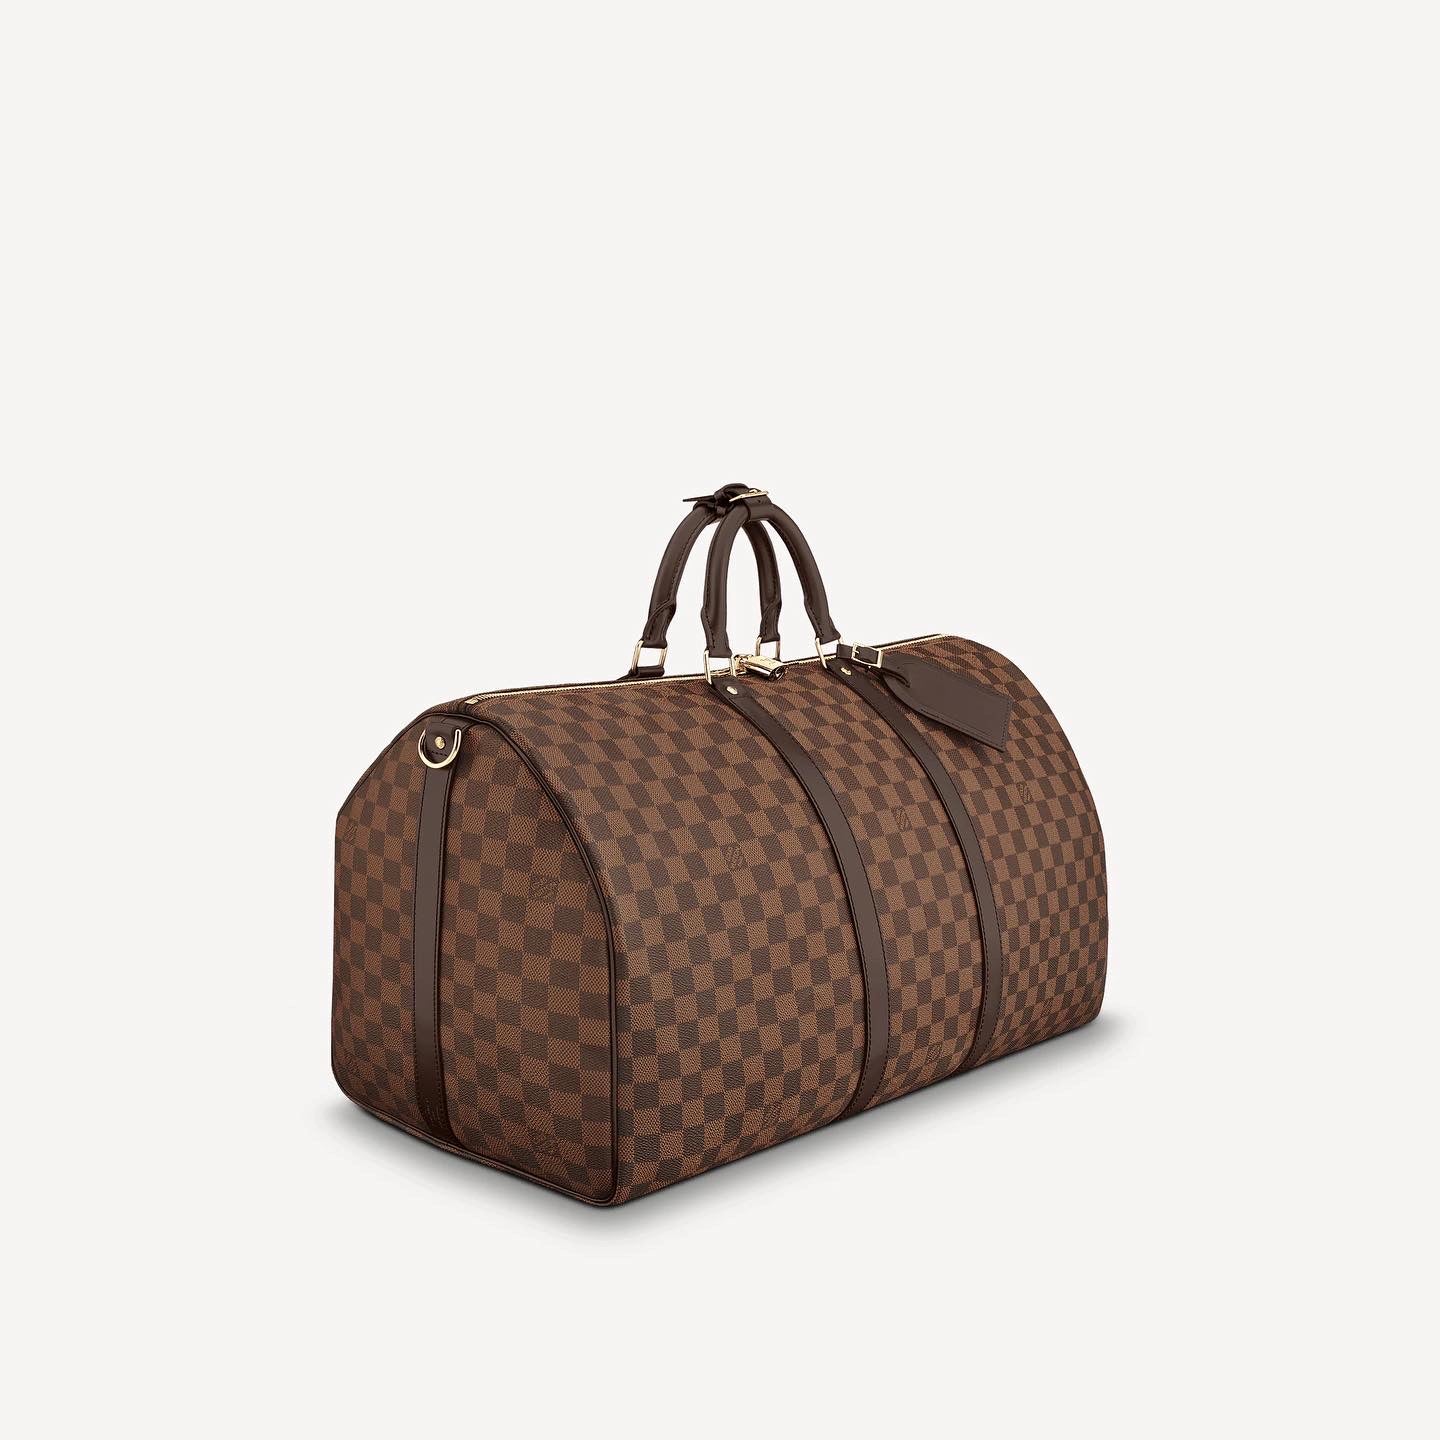 Products by Louis Vuitton: Keepall 55 with Shoulder Strap - Wishupon